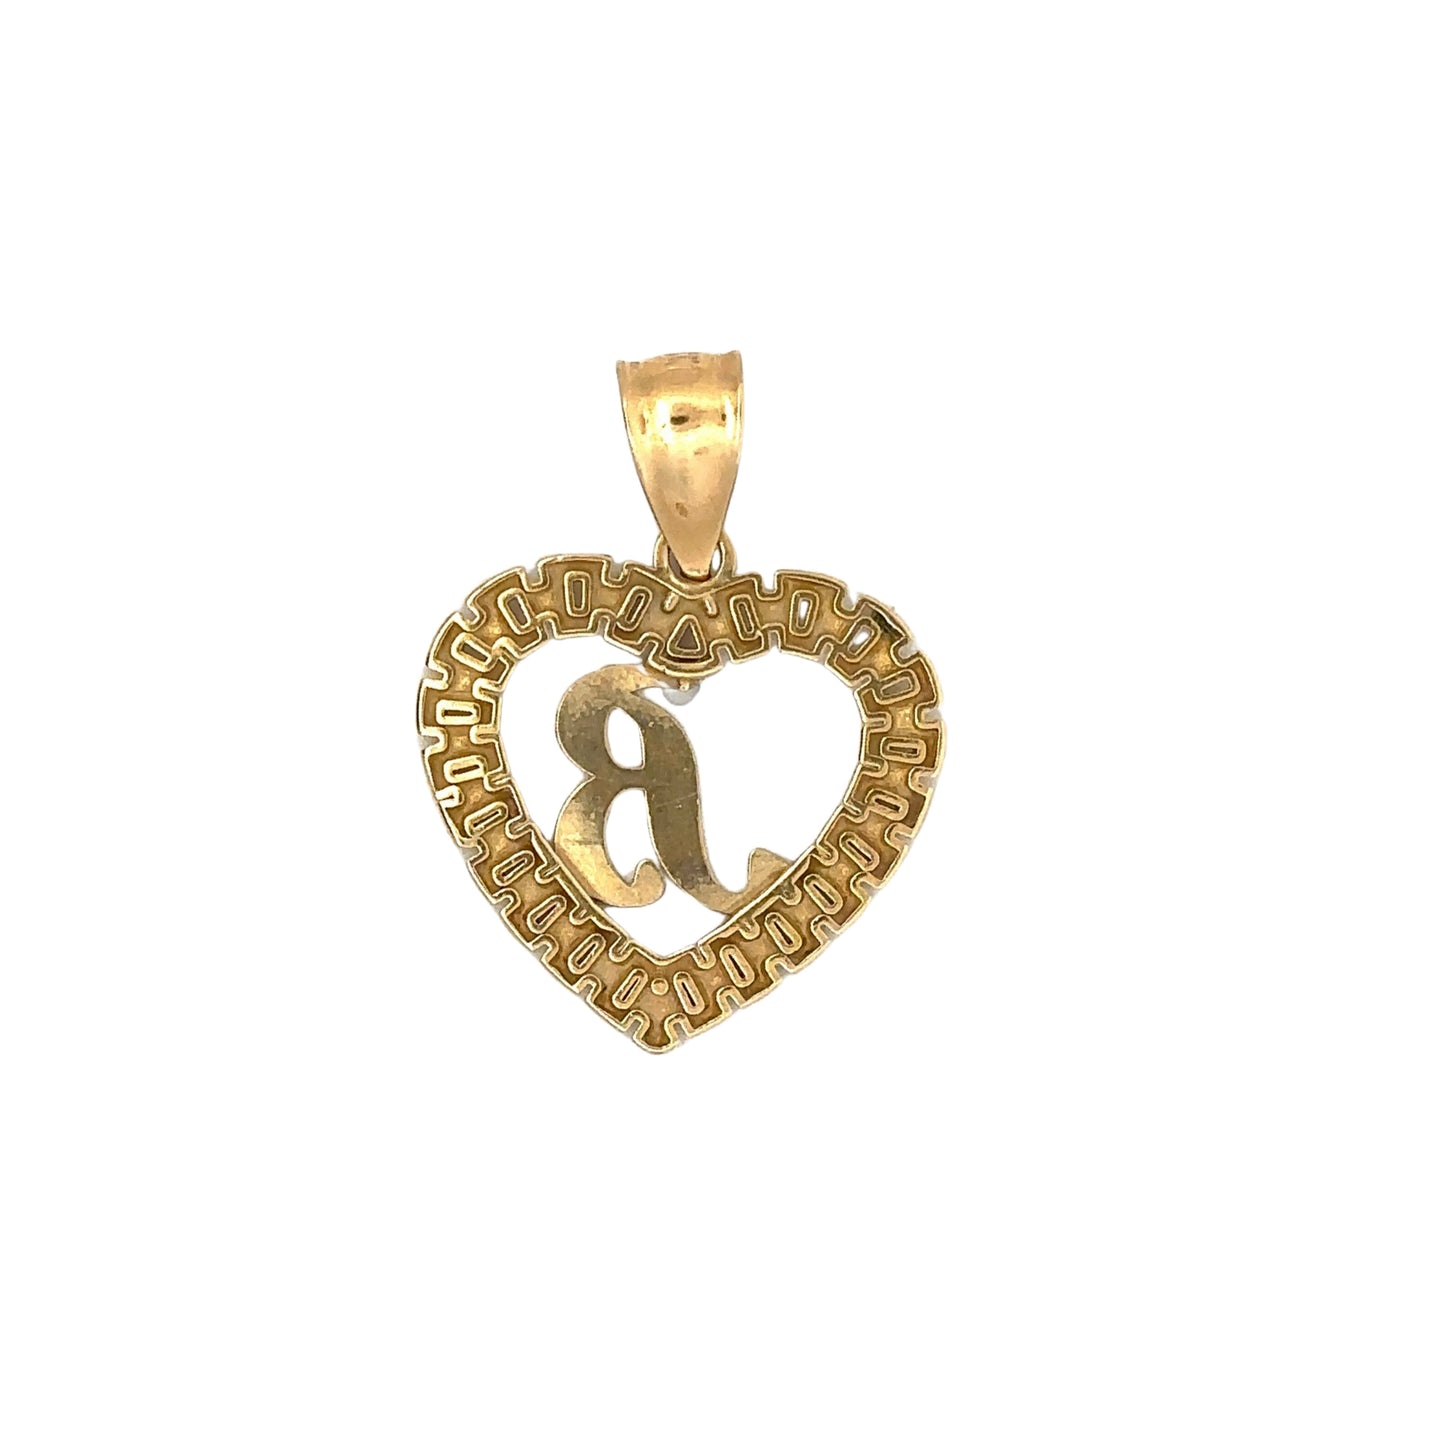 Back of yellow gold B heart pendant with scratches on the gold